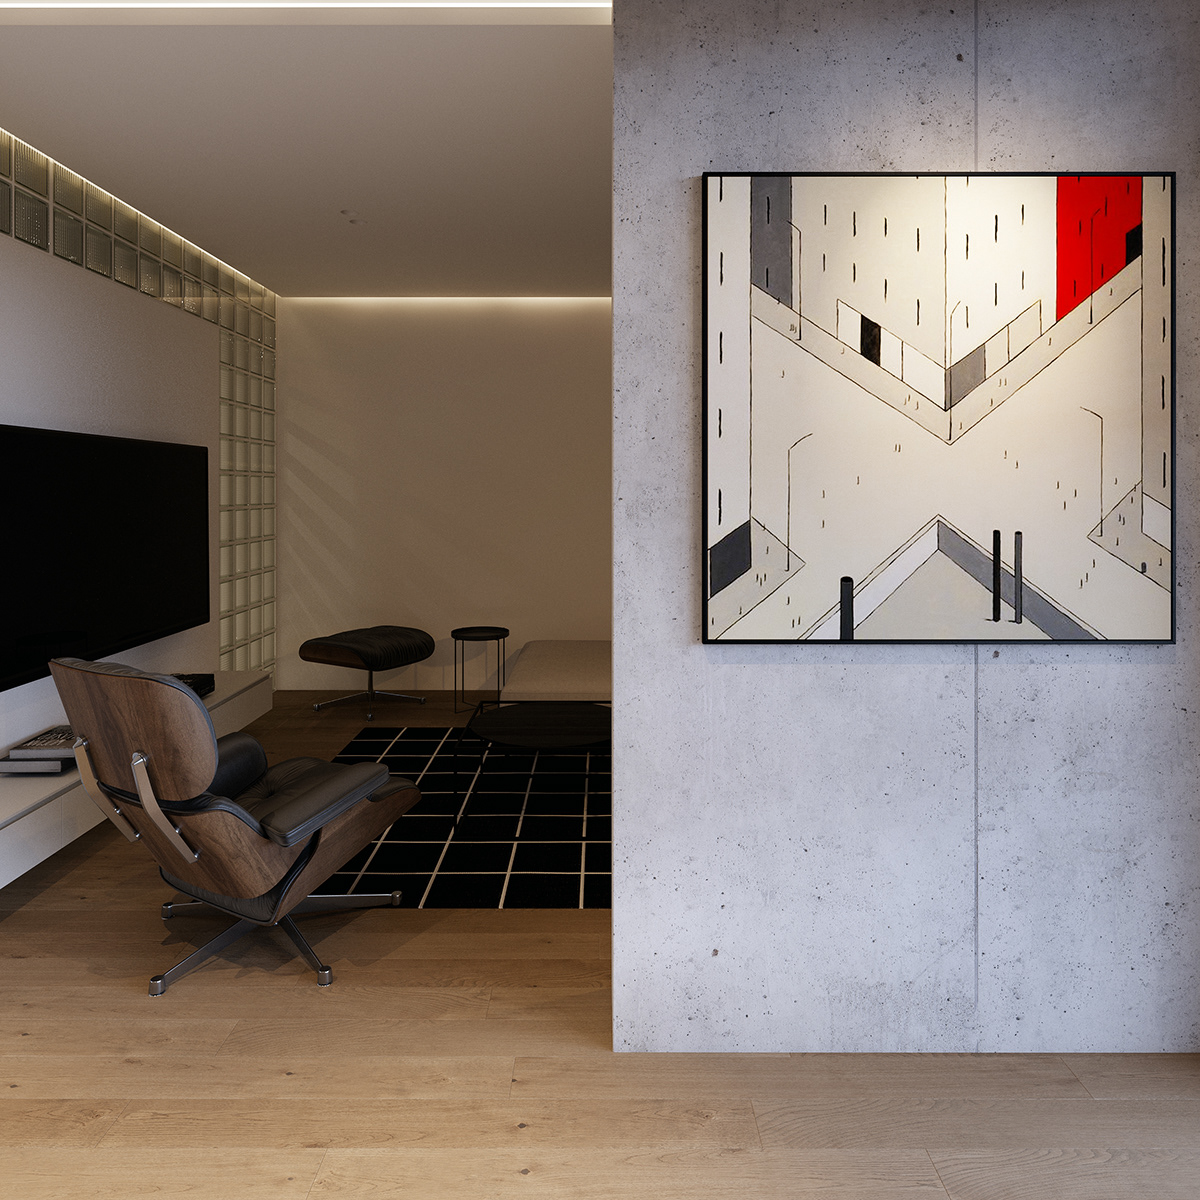 The abstract wall paintings add artistic beauty to the apartment while also providing a good atmosphere.